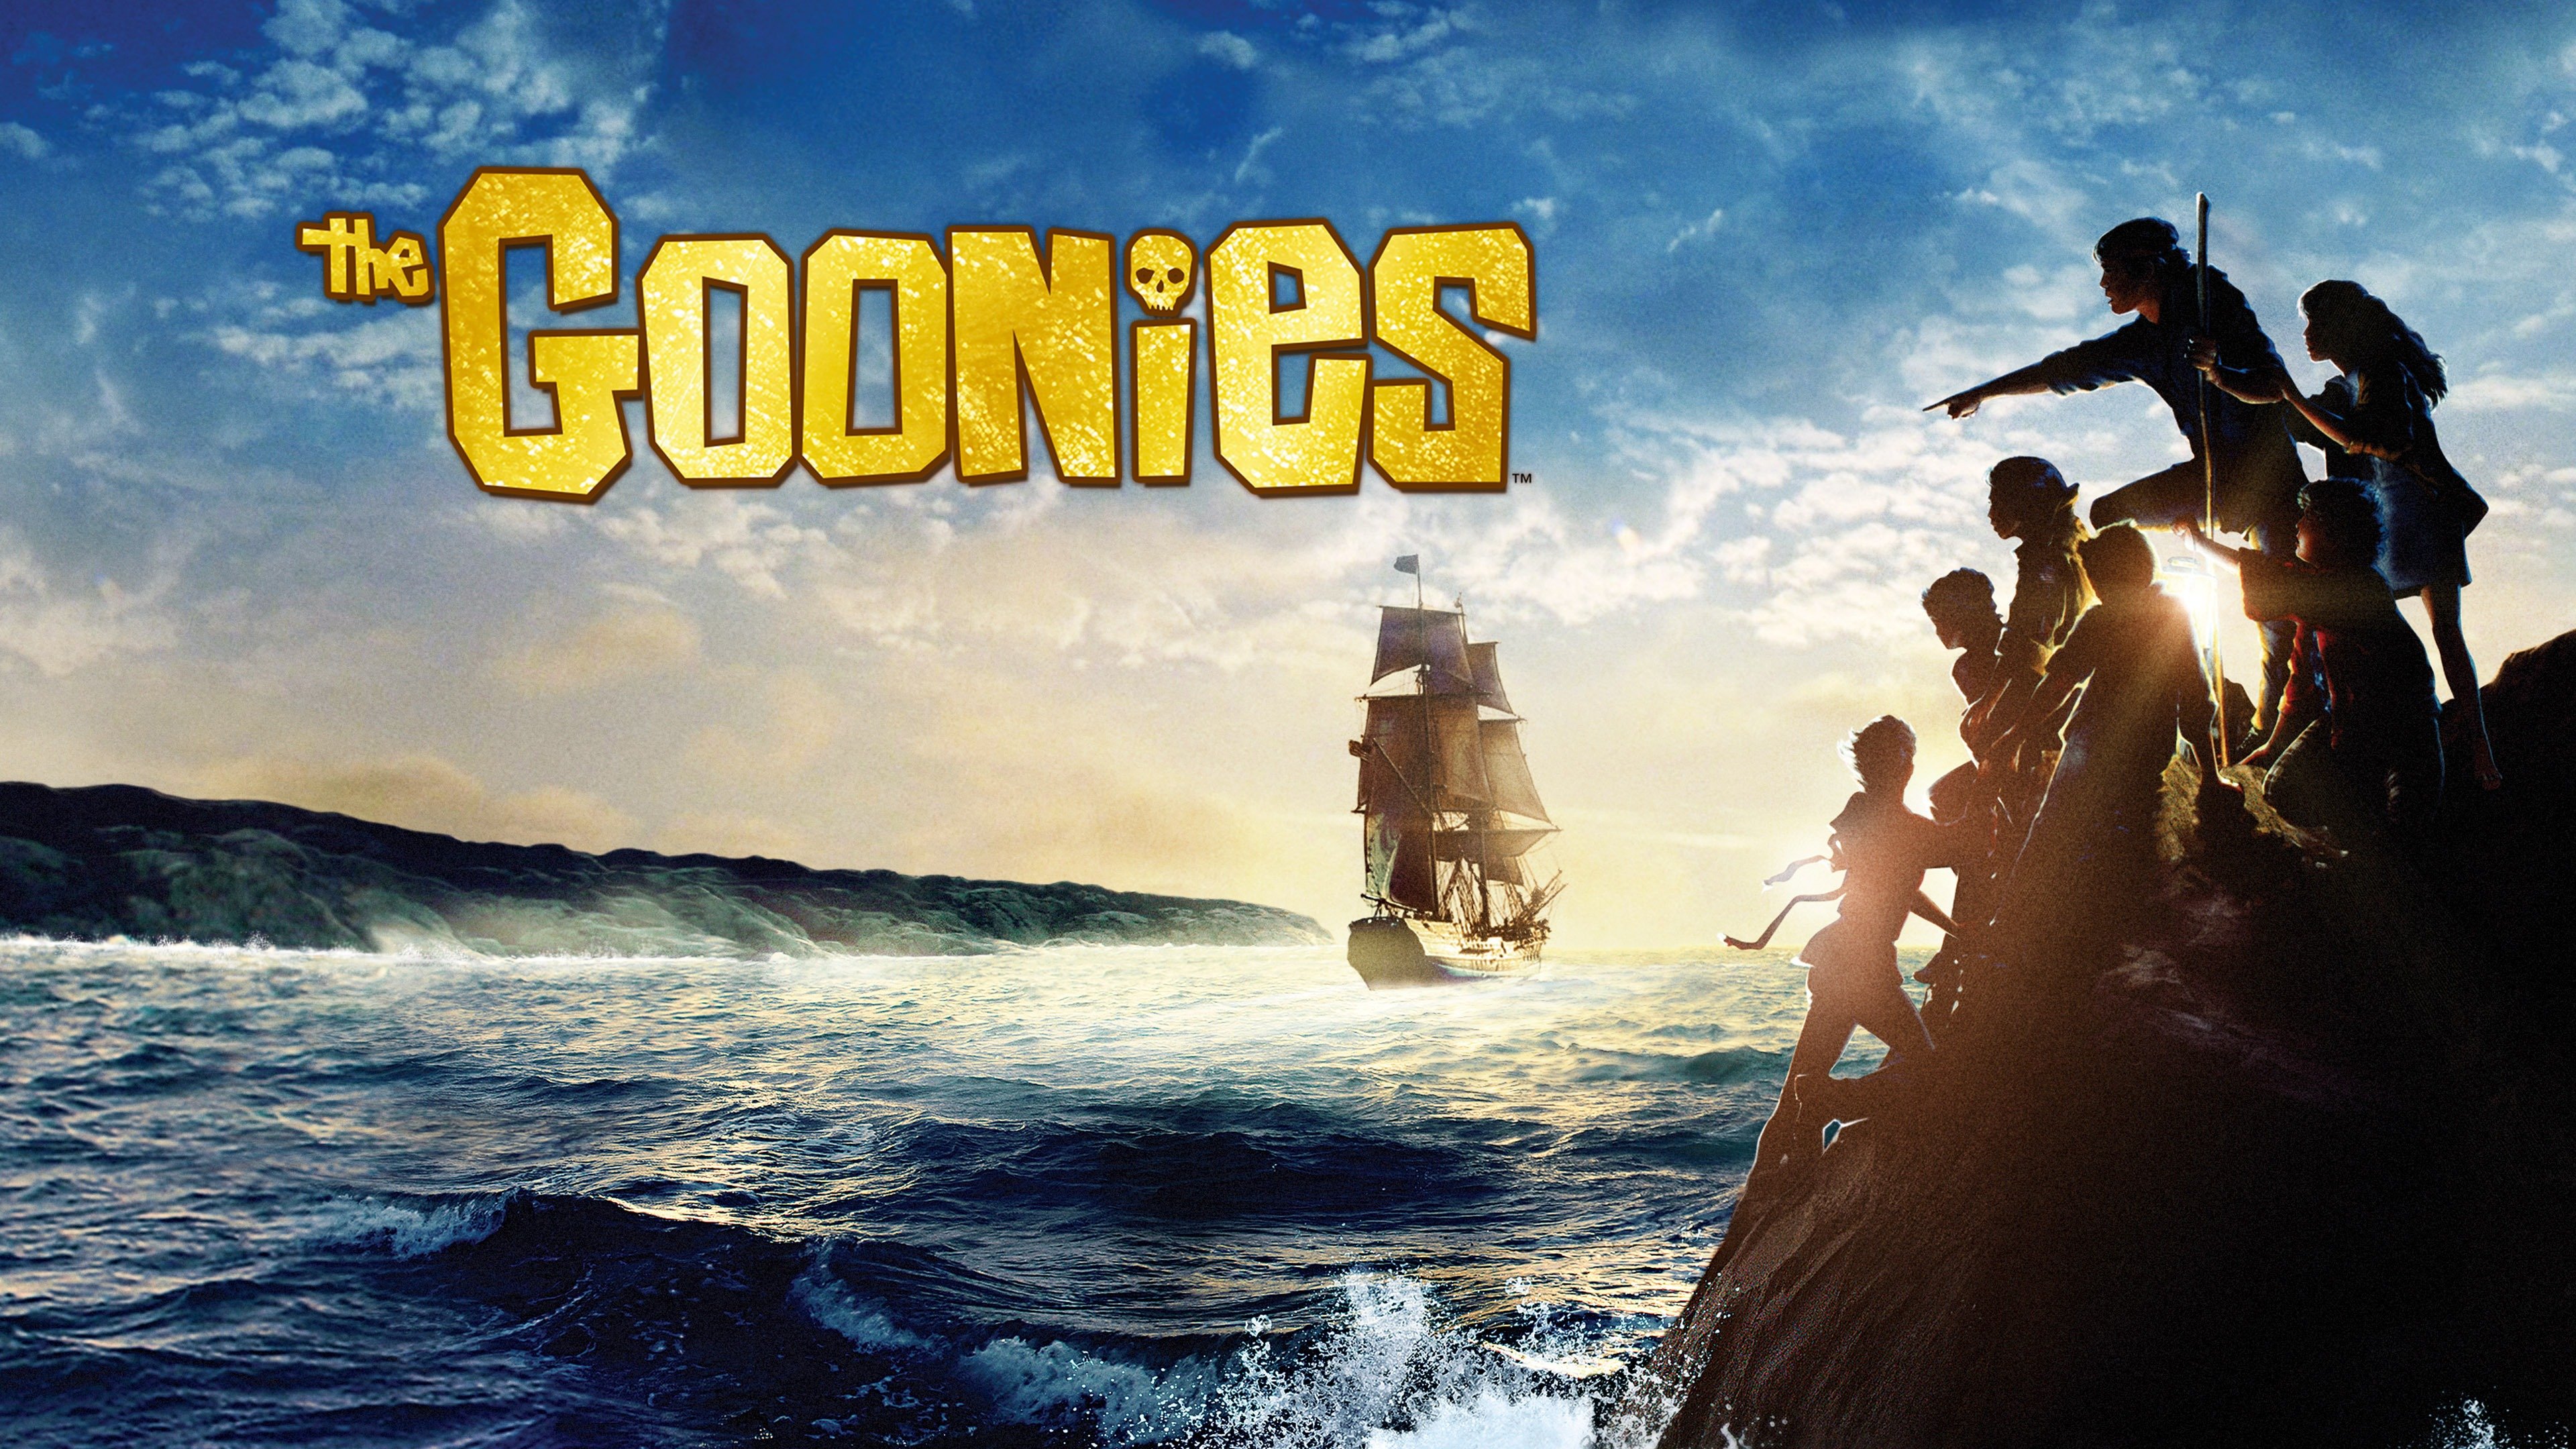 The Goonies Trailer 1 Trailers & Videos Rotten Tomatoes